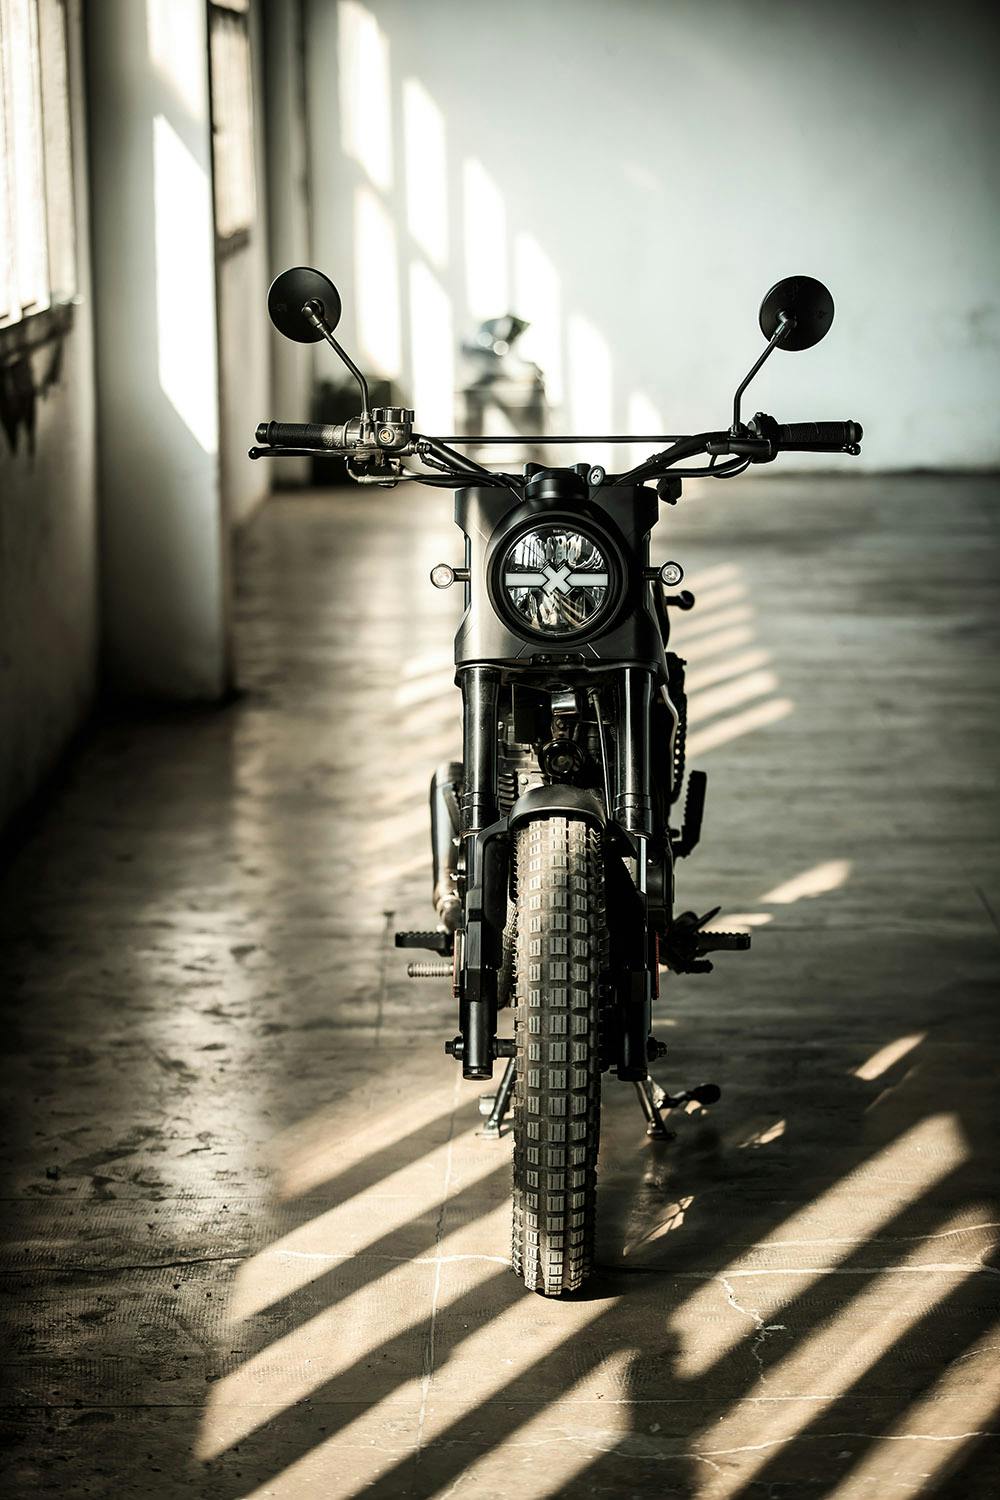 Frontal view of the Brixton Motorcycles Felsberg 250 in Timberwolf Grey